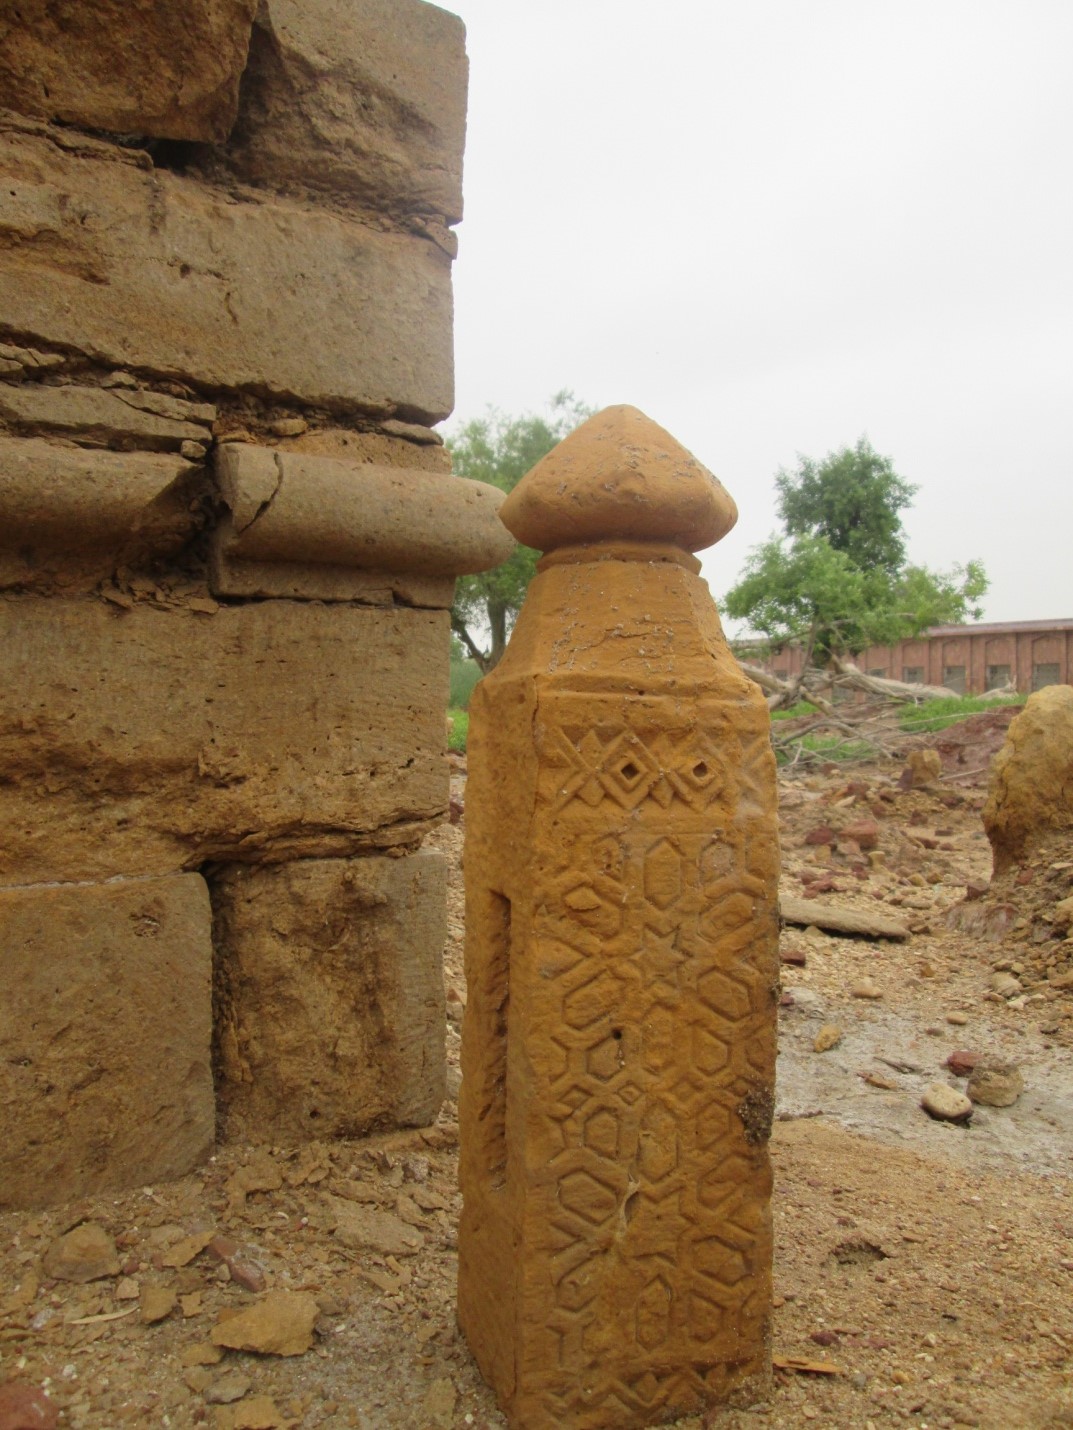 Burfat-Tombs-Sindh-Courier-3